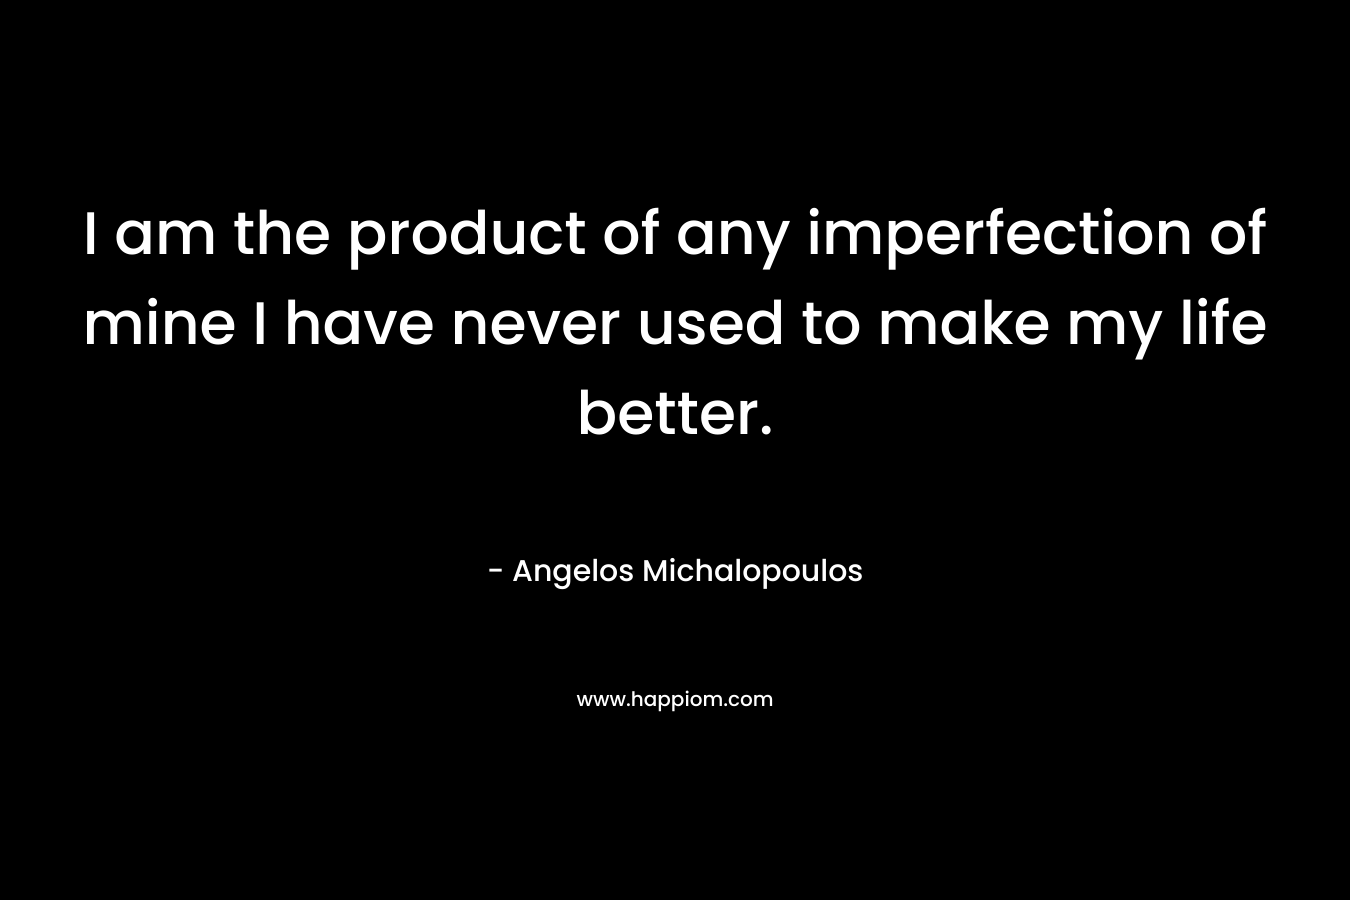 I am the product of any imperfection of mine I have never used to make my life better.